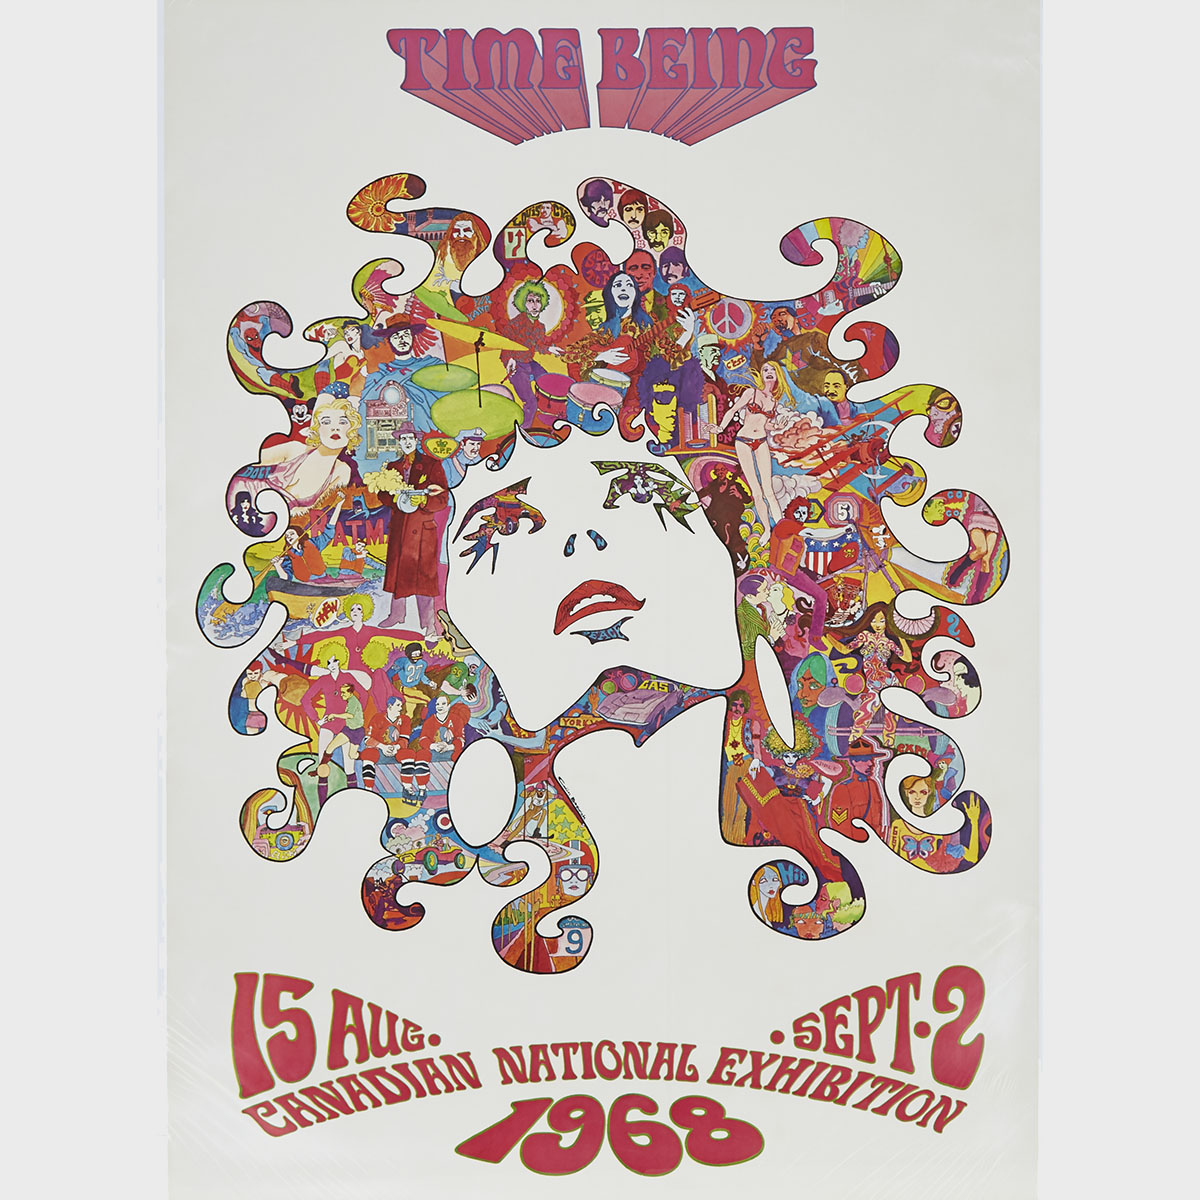 Canadian National Exhibition Poster, ‘Time Being’, 15 Aug. - Sept. 2, 1968